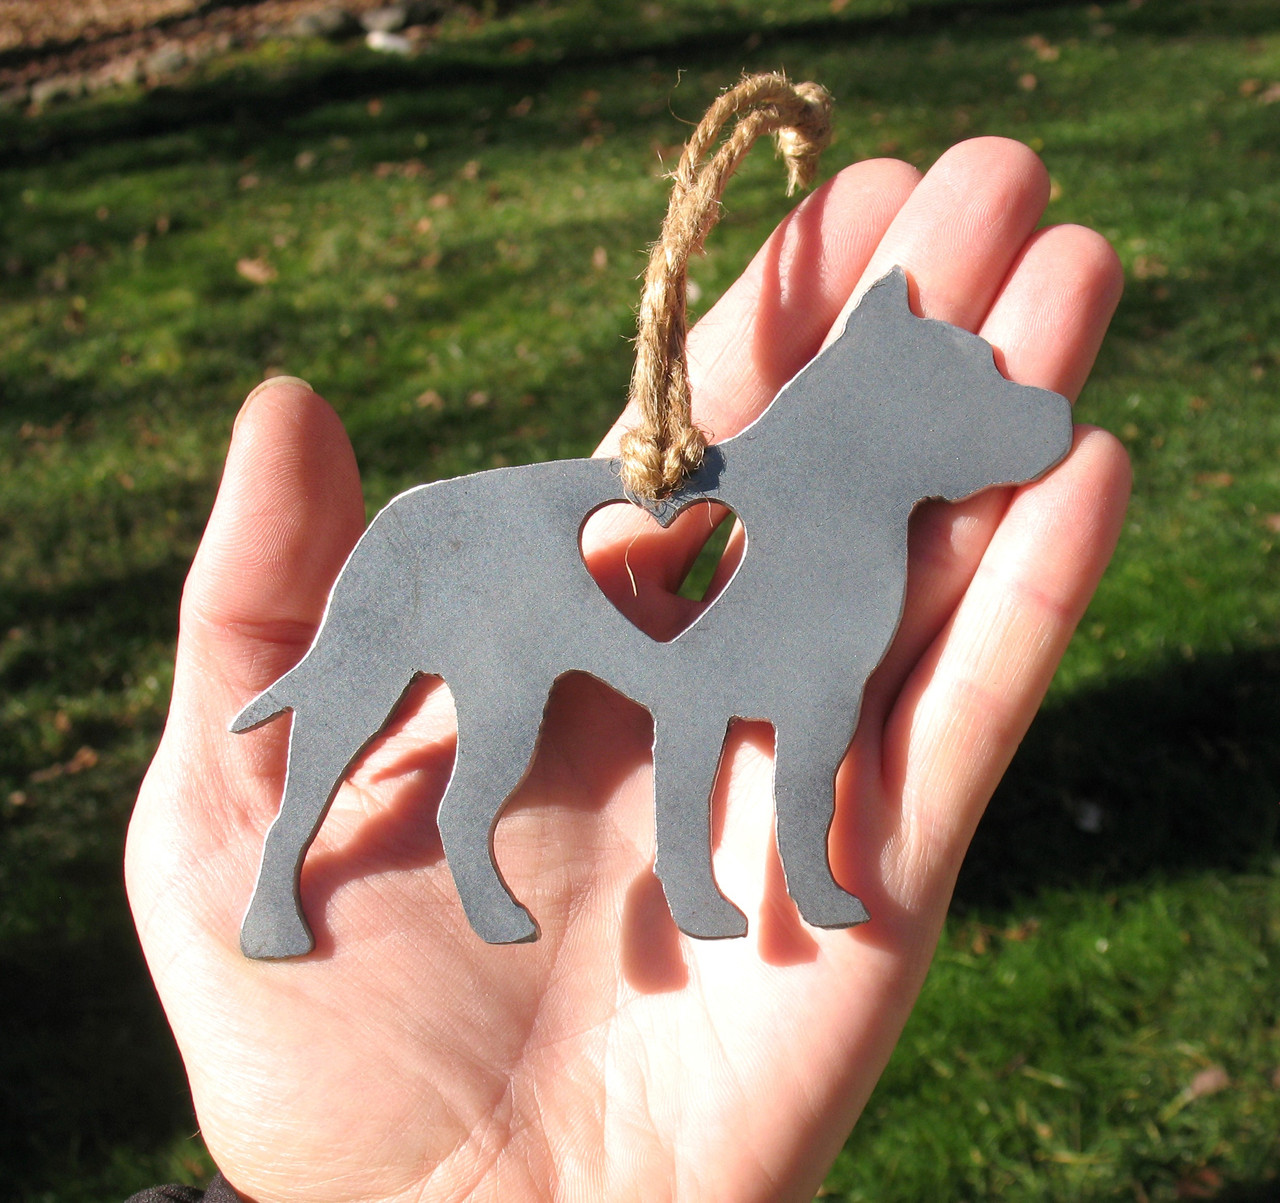 American Staffordshire Terrier Pet Loss Gift Ornament - Pet Memorial - Dog Sympathy Remembrance Gift - Metal Dog Christmas Ornament